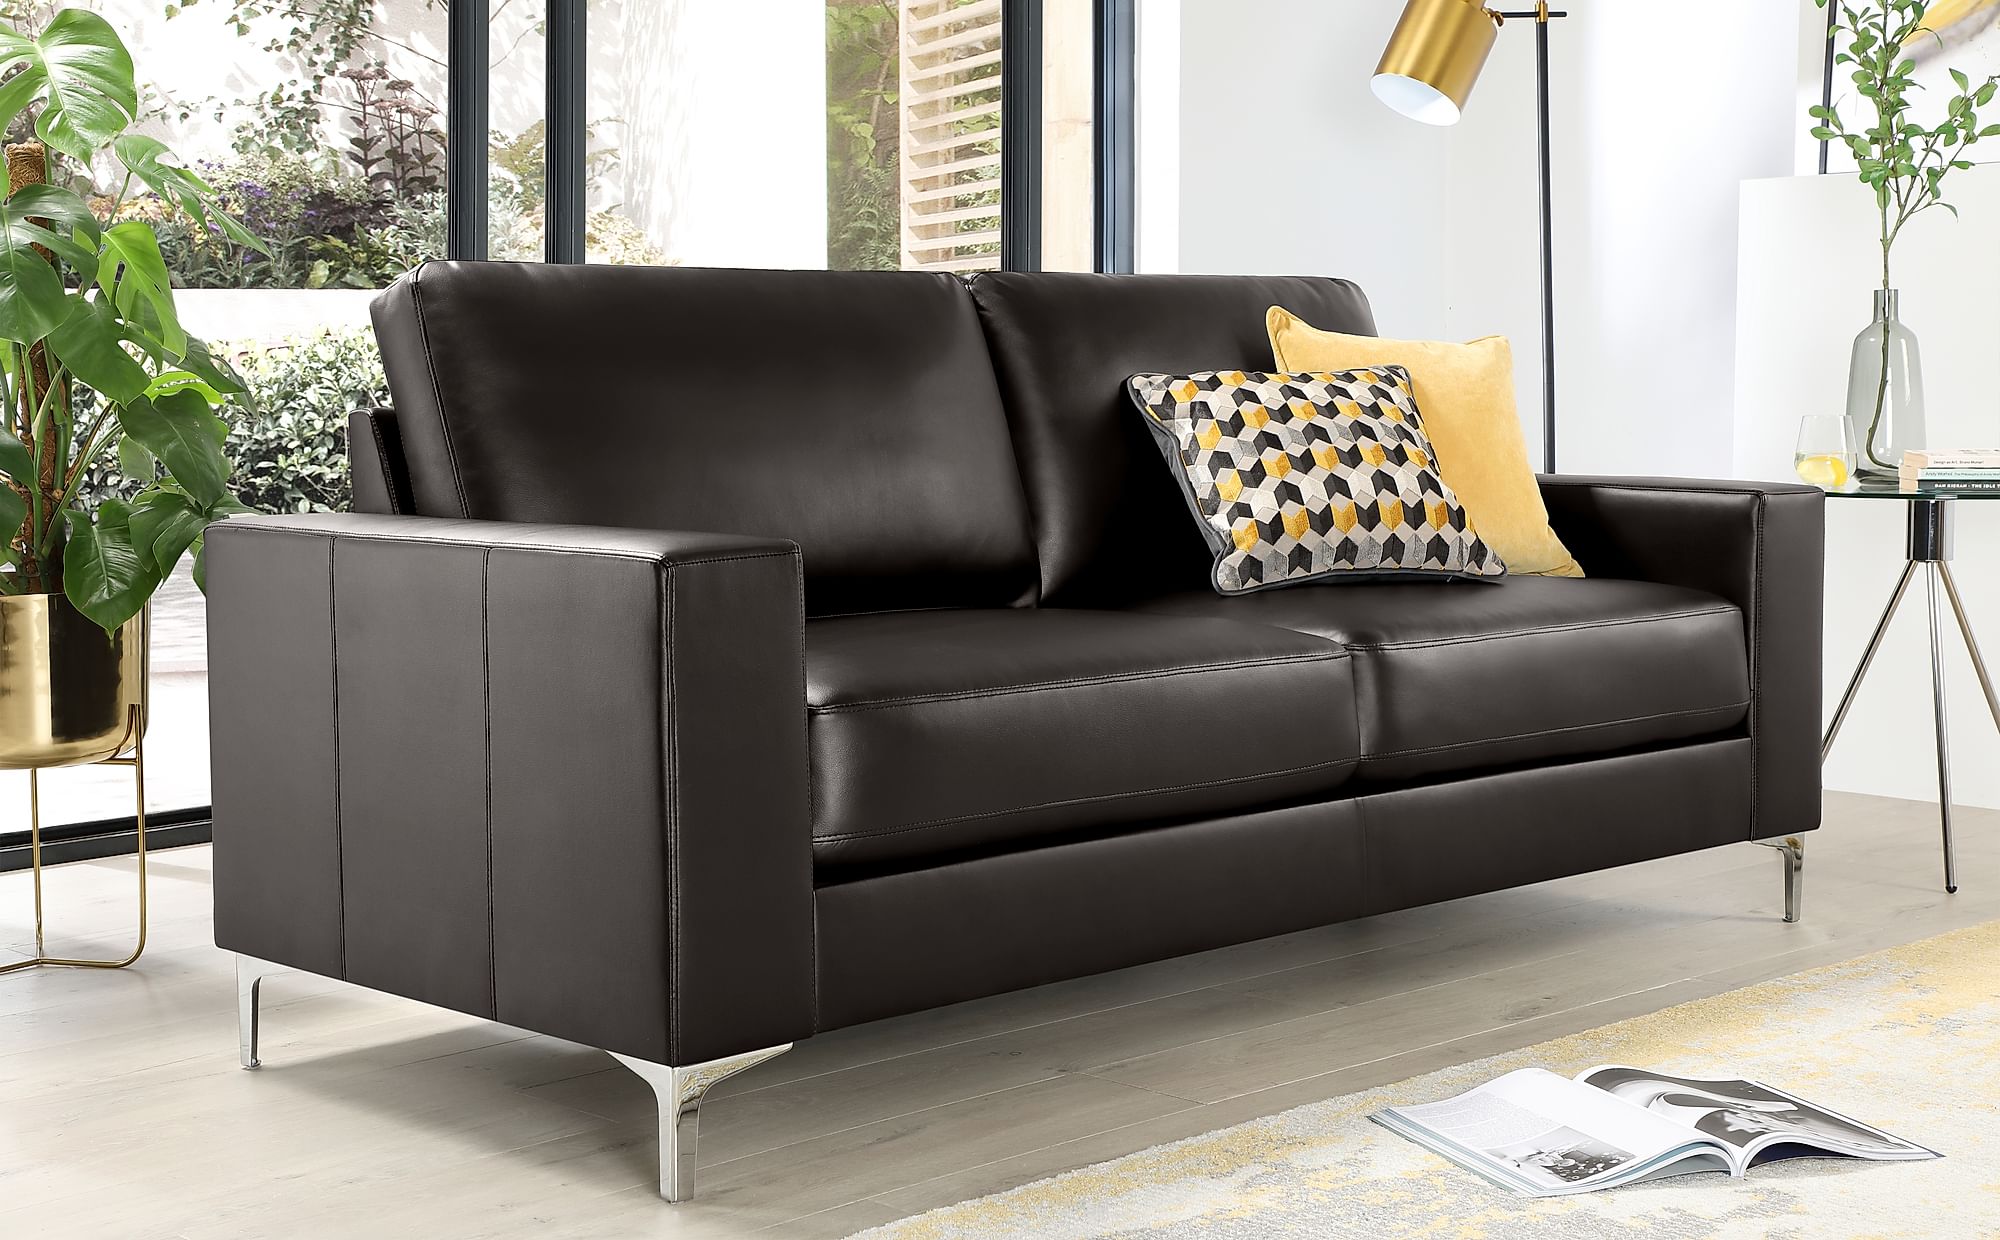 3 seater fabric sofa bed with storage